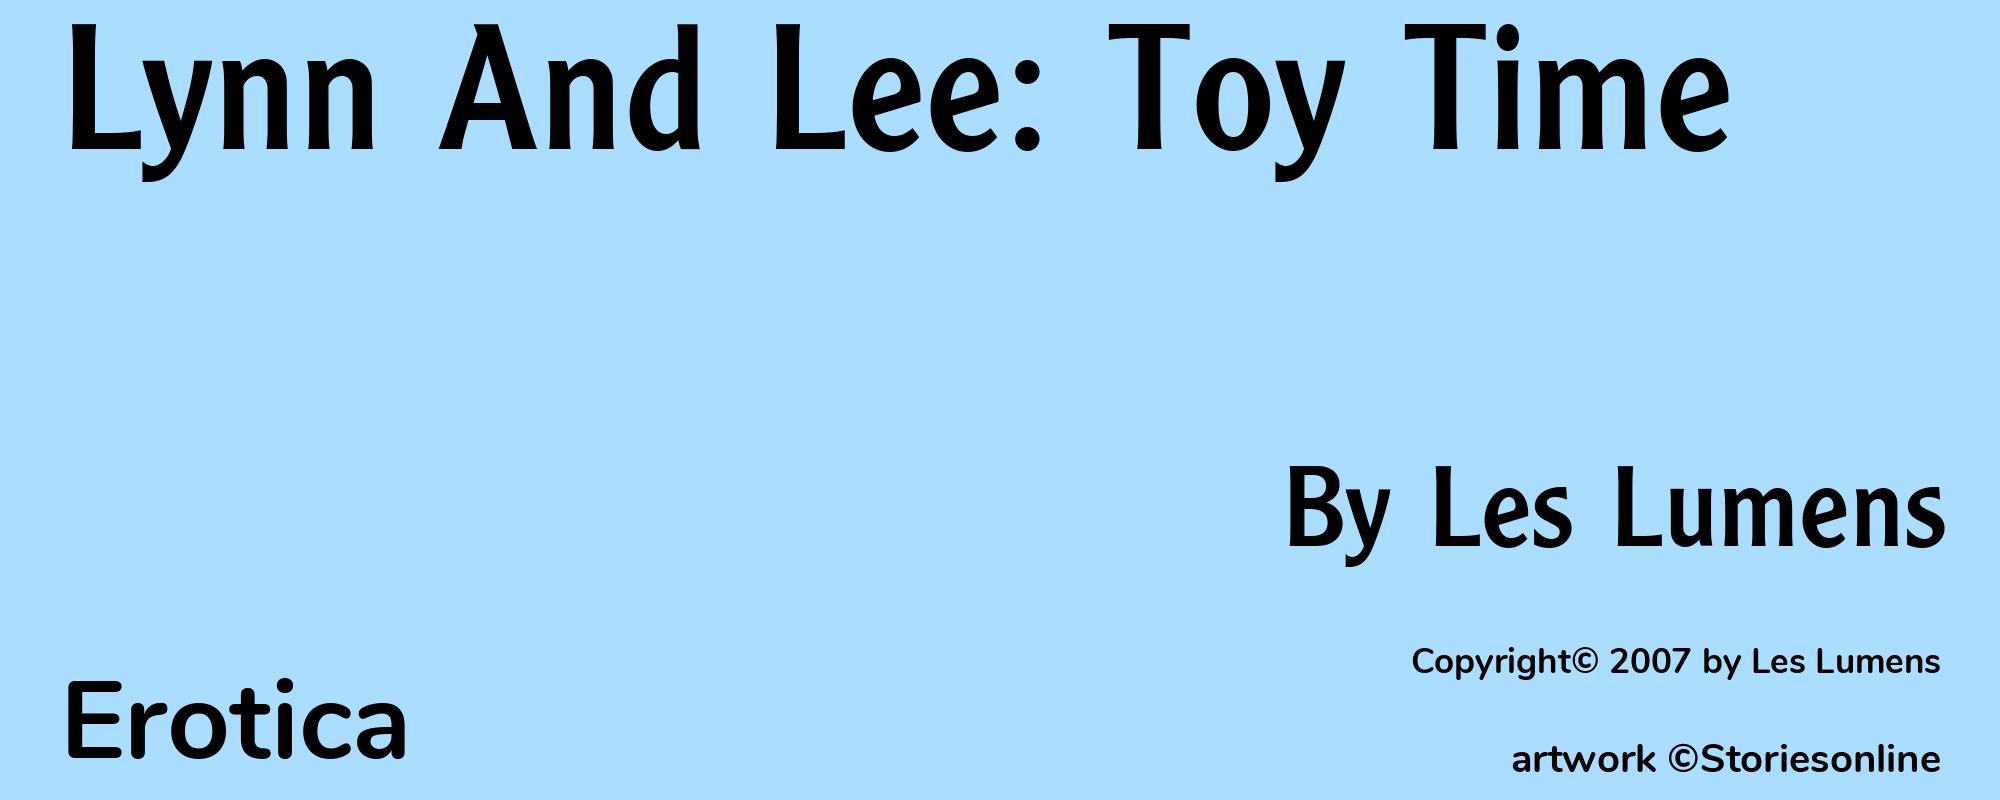 Lynn And Lee: Toy Time - Cover